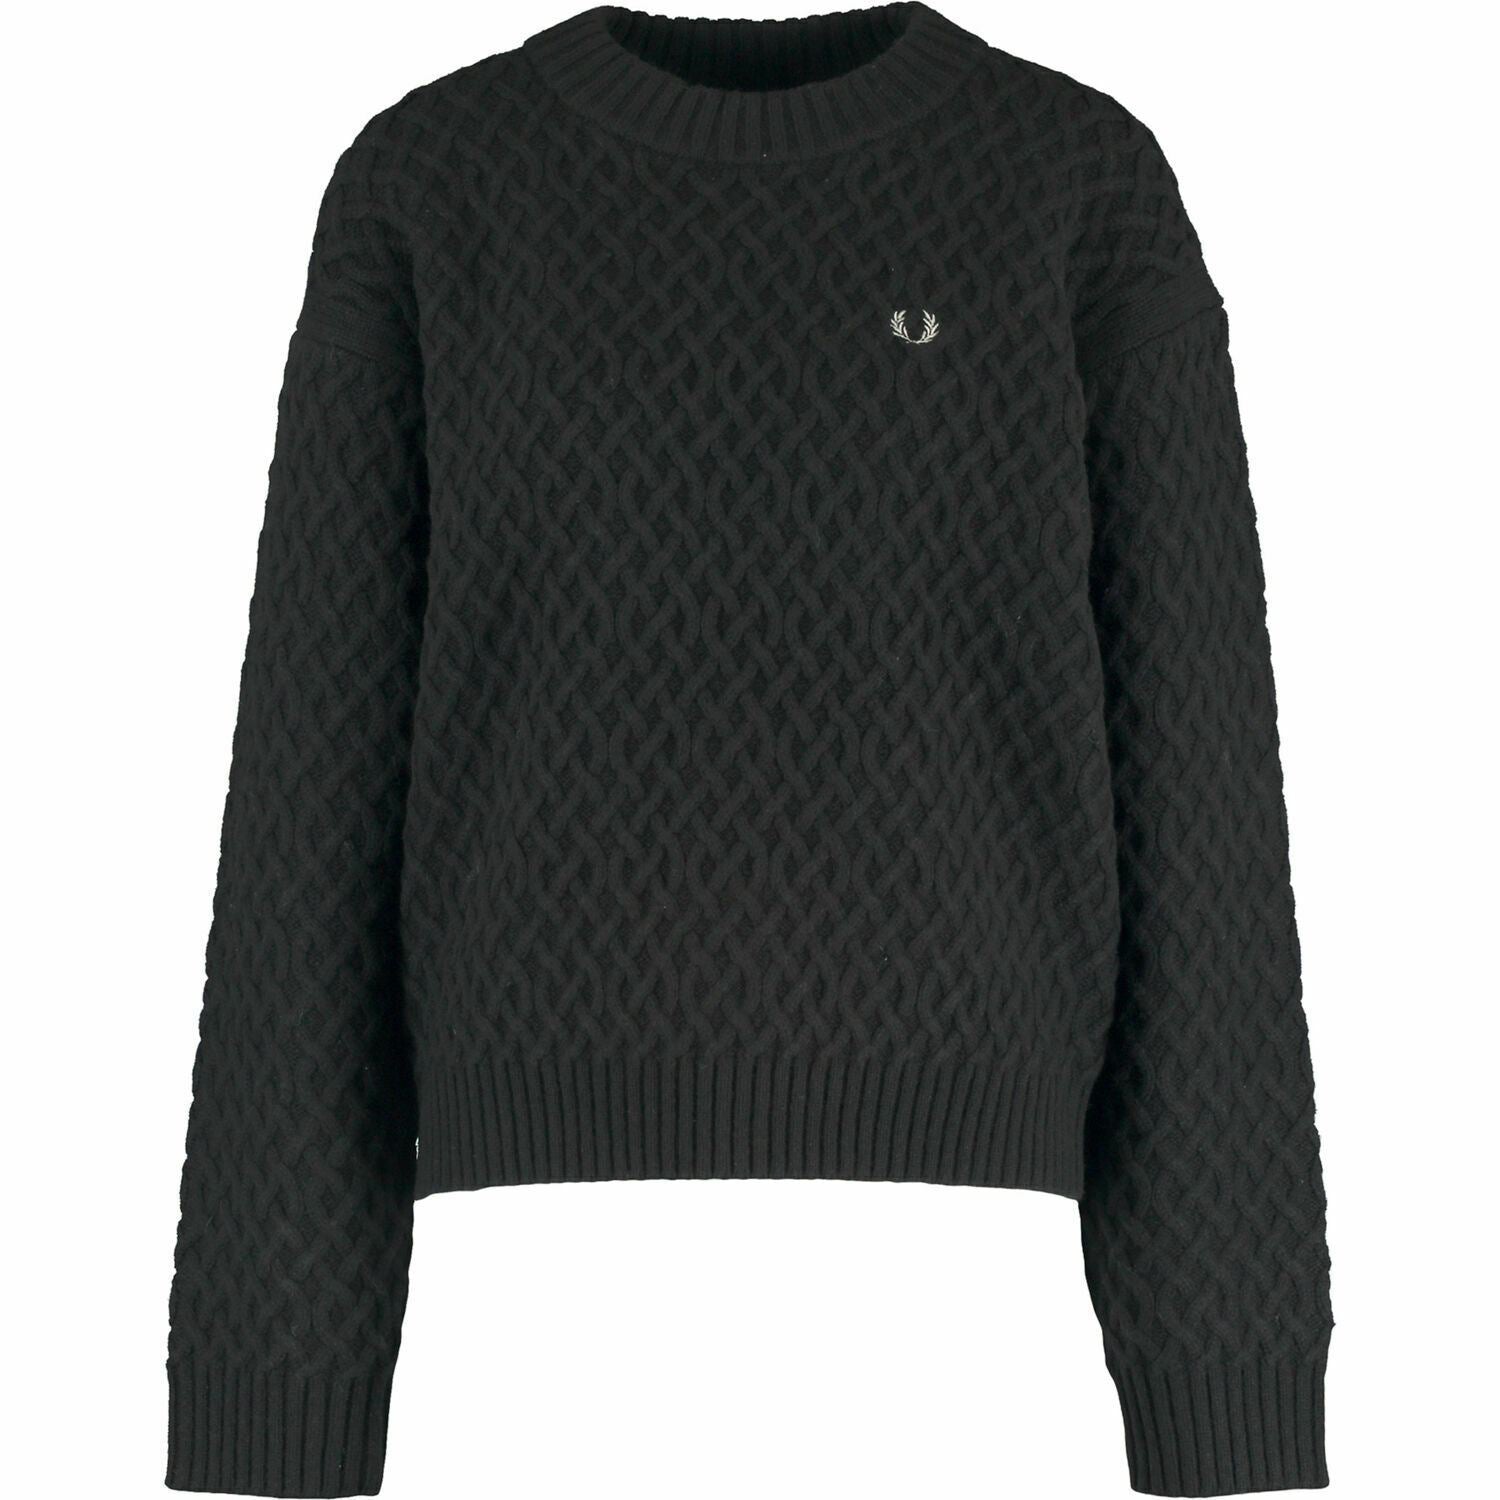 FRED PERRY Women's Textured Knit Jumper, WOOL BLEND, Black, UK 10